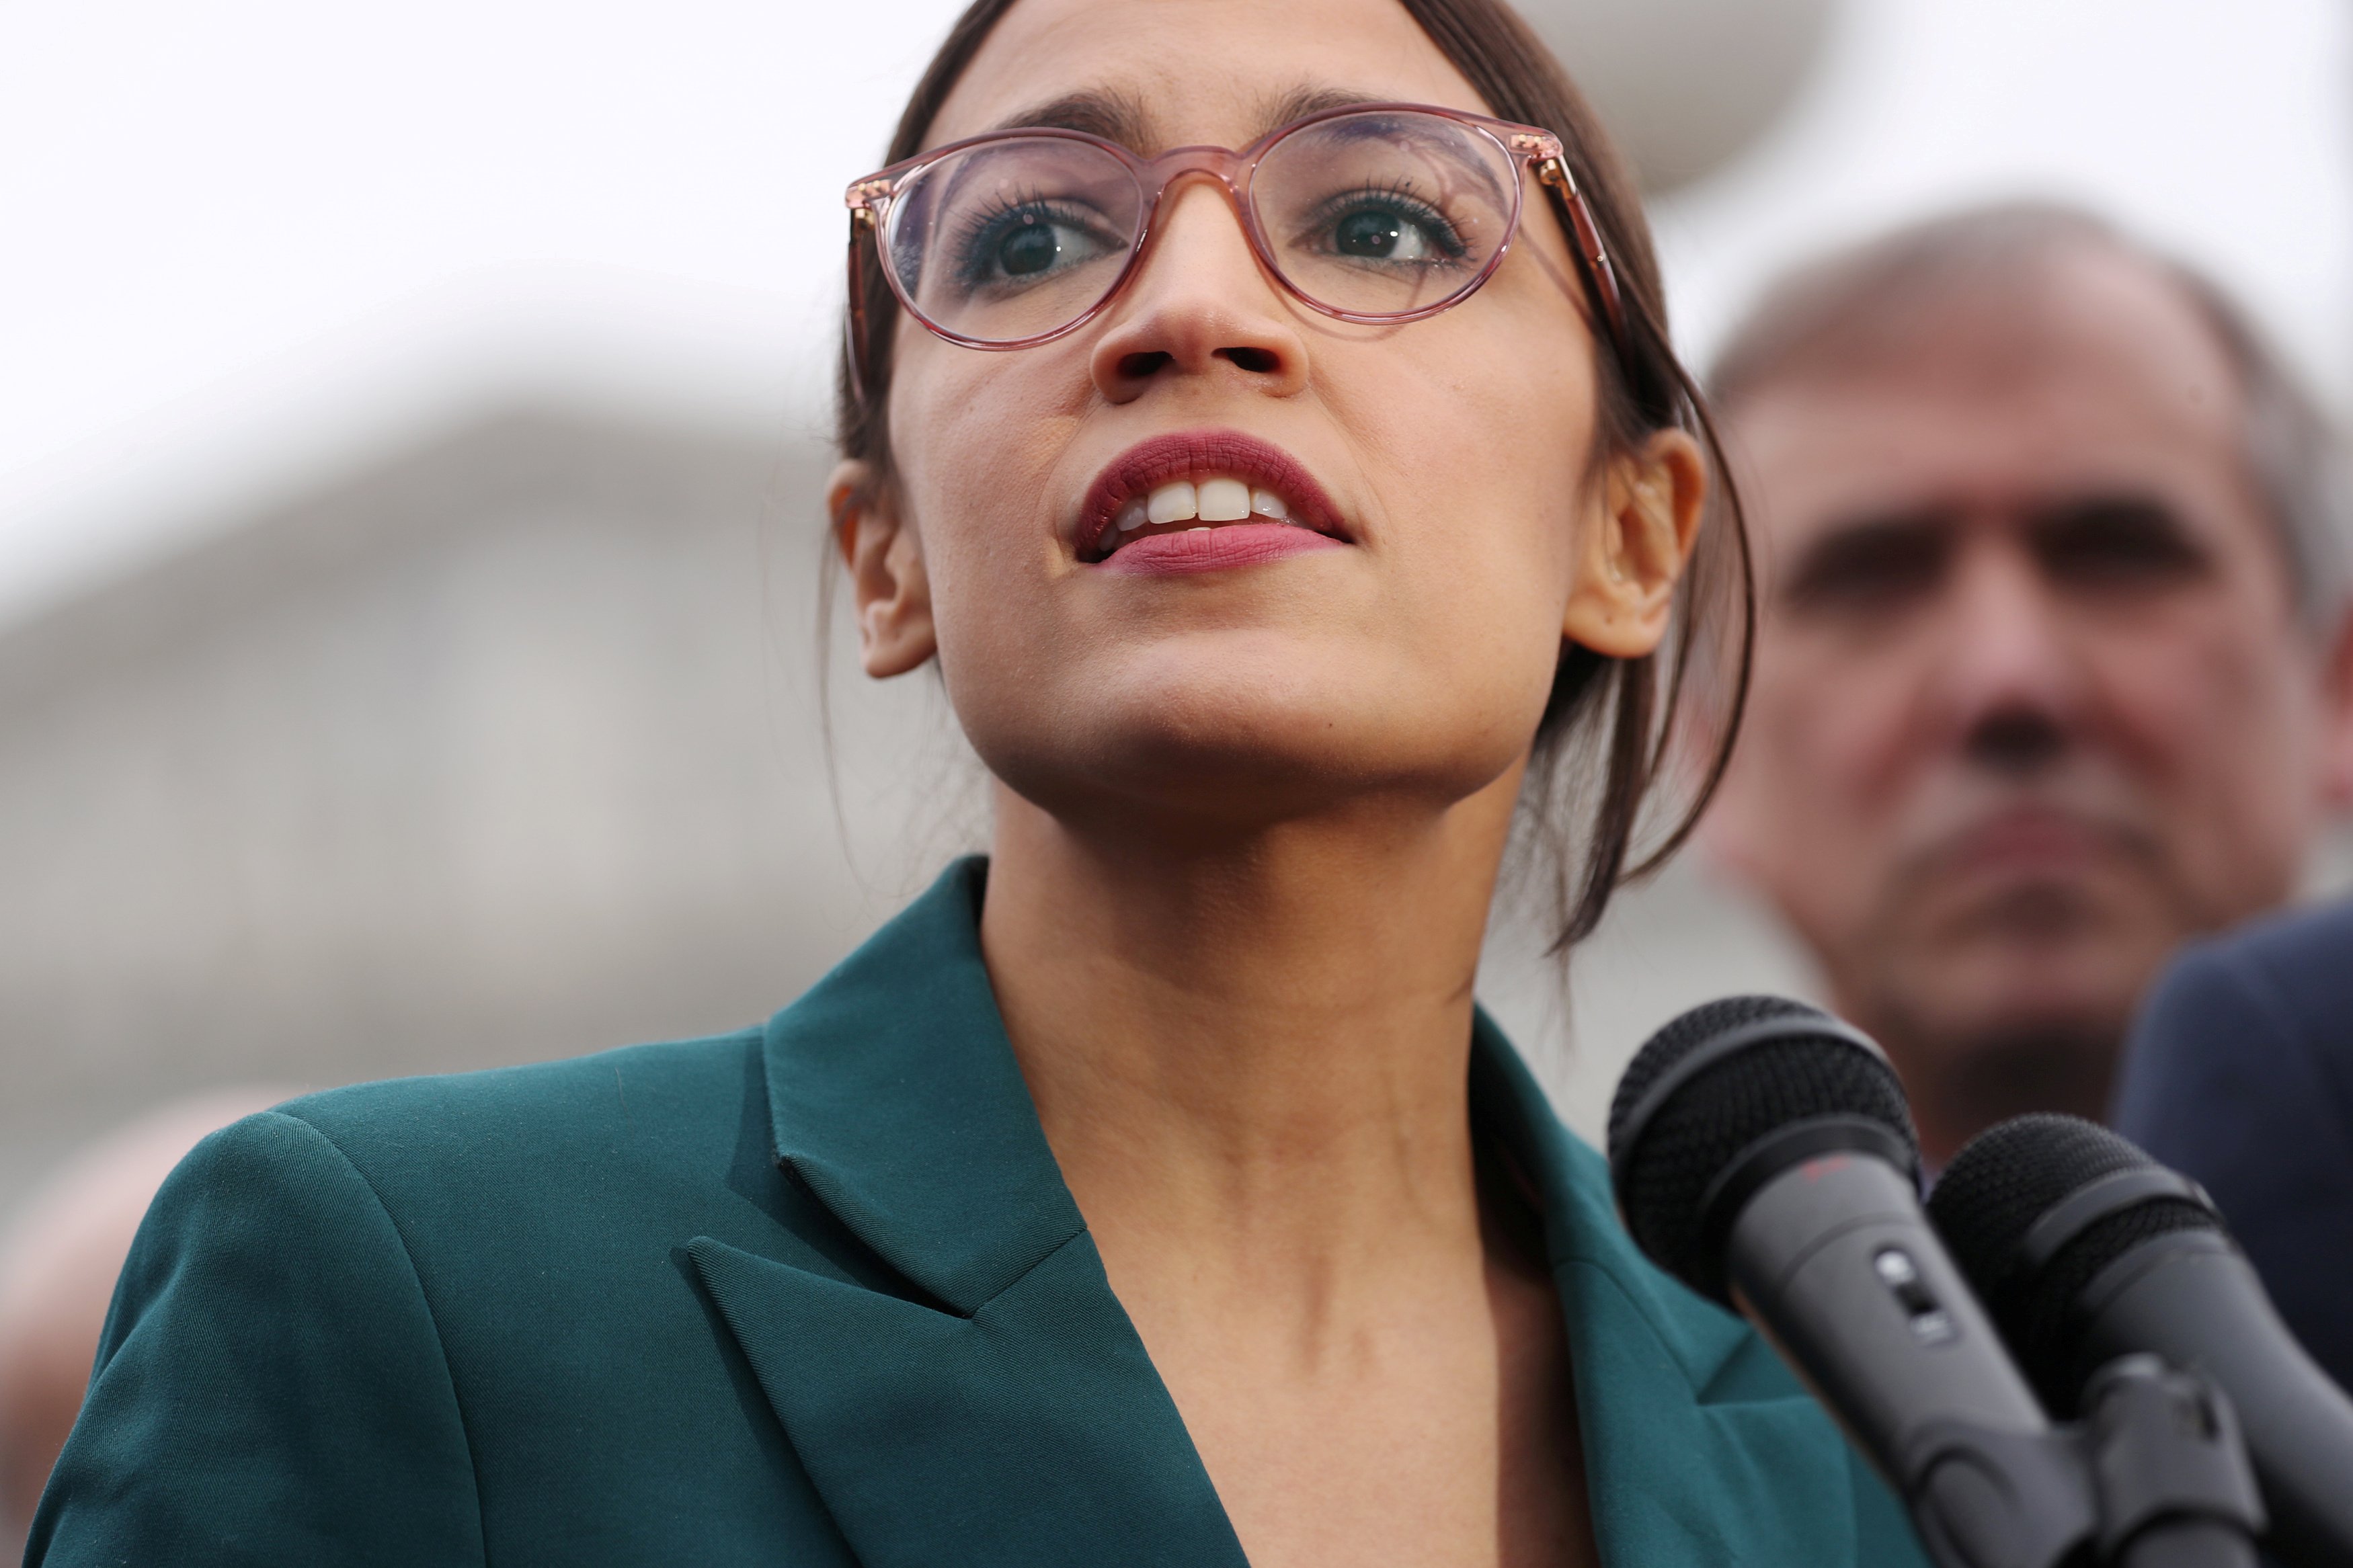 U.S. Representative Alexandria Ocasio-Cortez (D-NY) speaks during a news conference for a proposed "Green New Deal" to achieve net-zero greenhouse gas emissions in 10 years, at the U.S. Capitol in Washington, U.S. February 7, 2019. REUTERS/Jonathan Ernst/File Photo